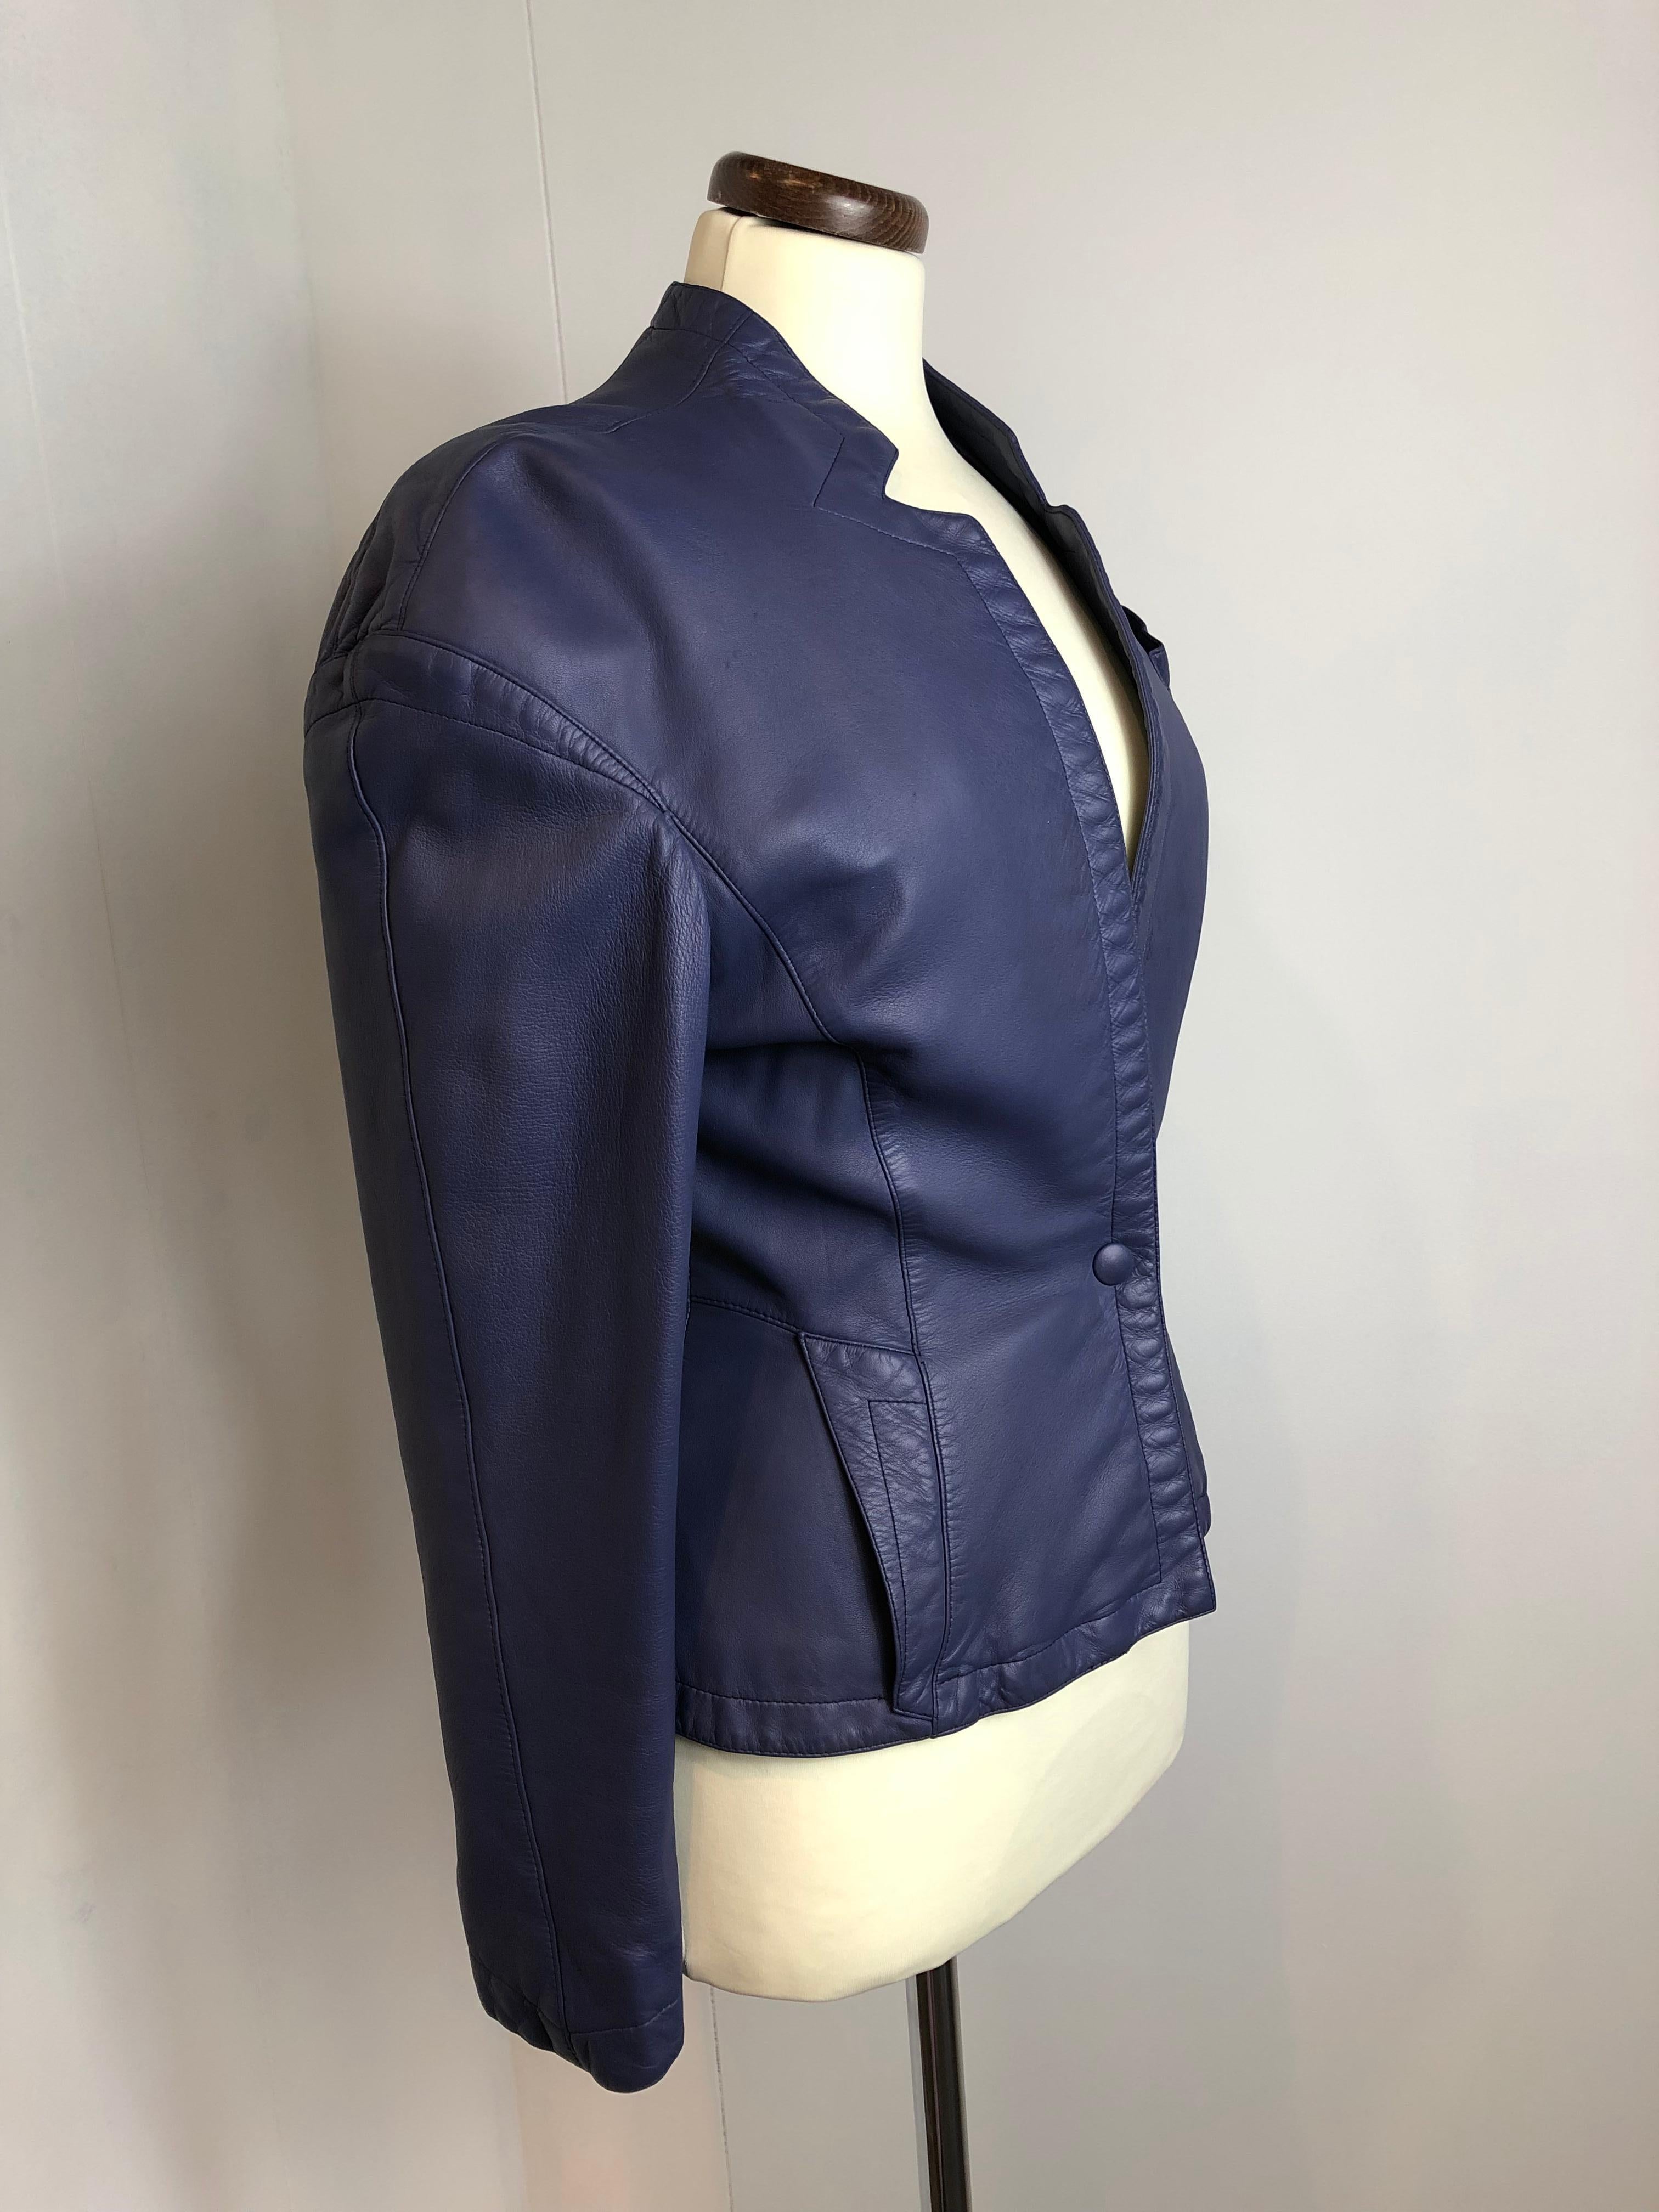 Thierry Mugler Jacket. Amazing violet leather ( as you can see from the pictures there's small defects on the sleeves).
Featuring V neck line, a front clip button and two front pockets.
Iconic shoulder pad traits of Thierry Mugler.
Size 40 Italian.